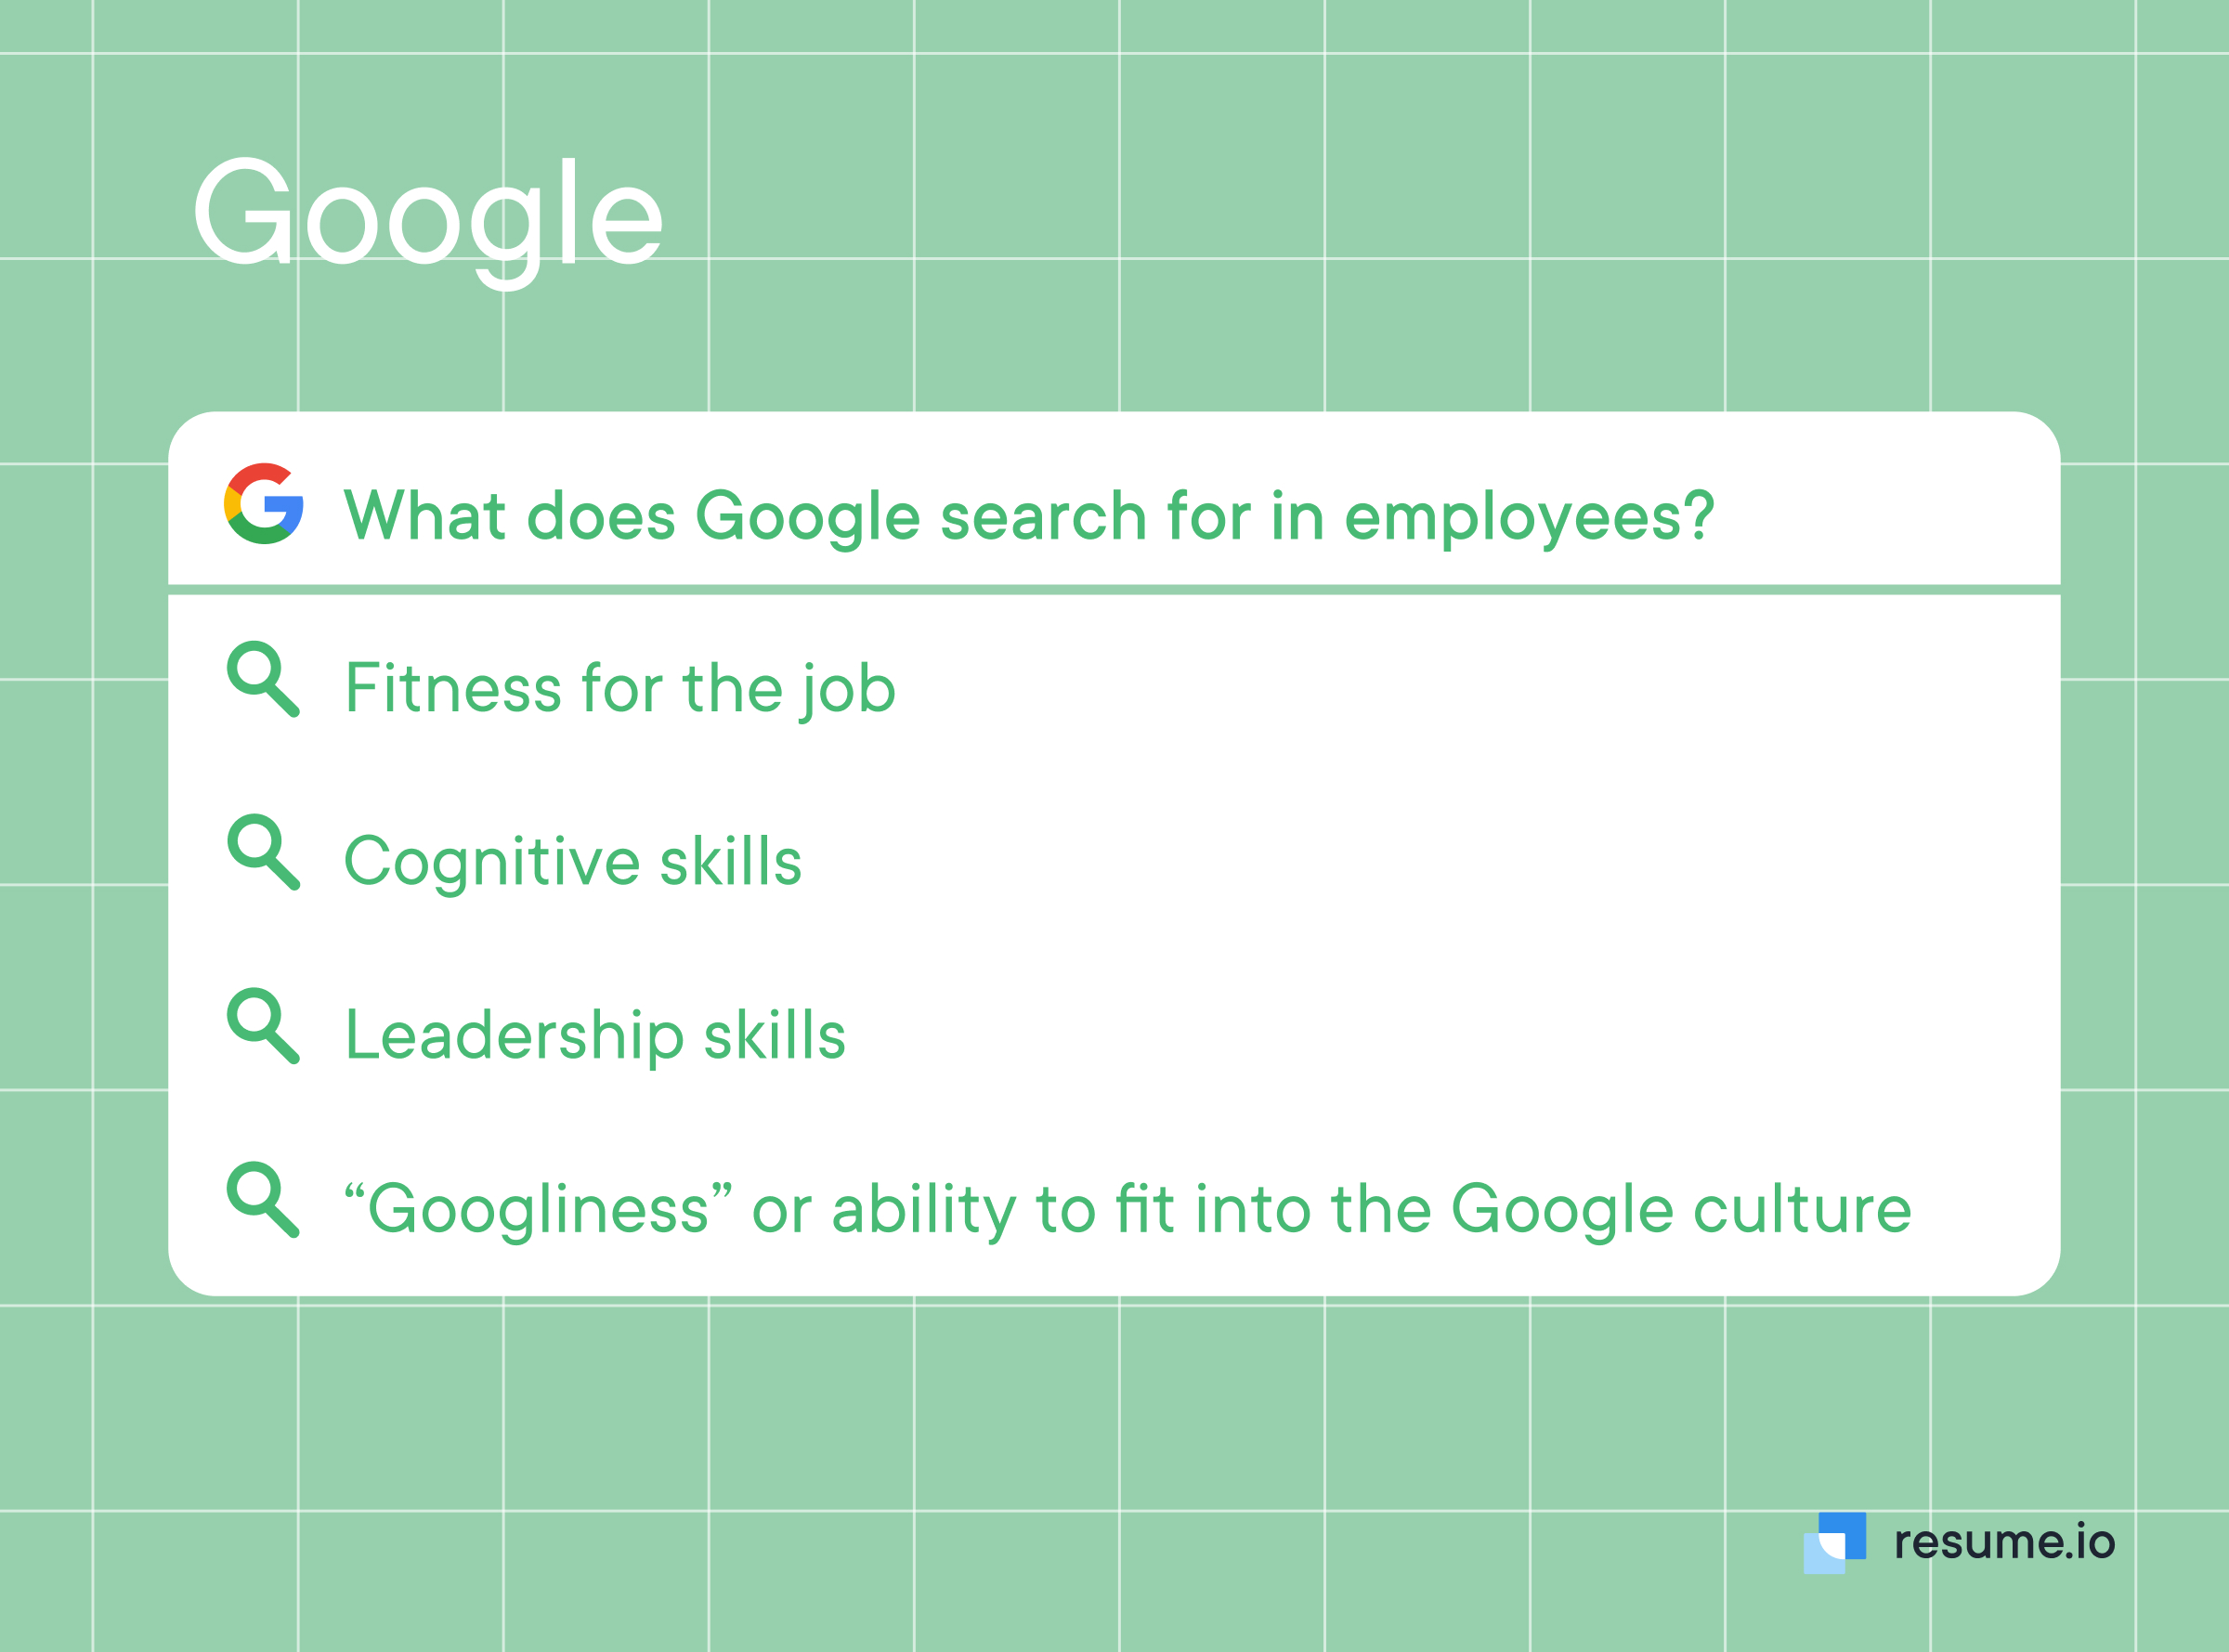 What Google search for in employees are fitness, cognitive skills, leadership skills and 'Googliness'. 